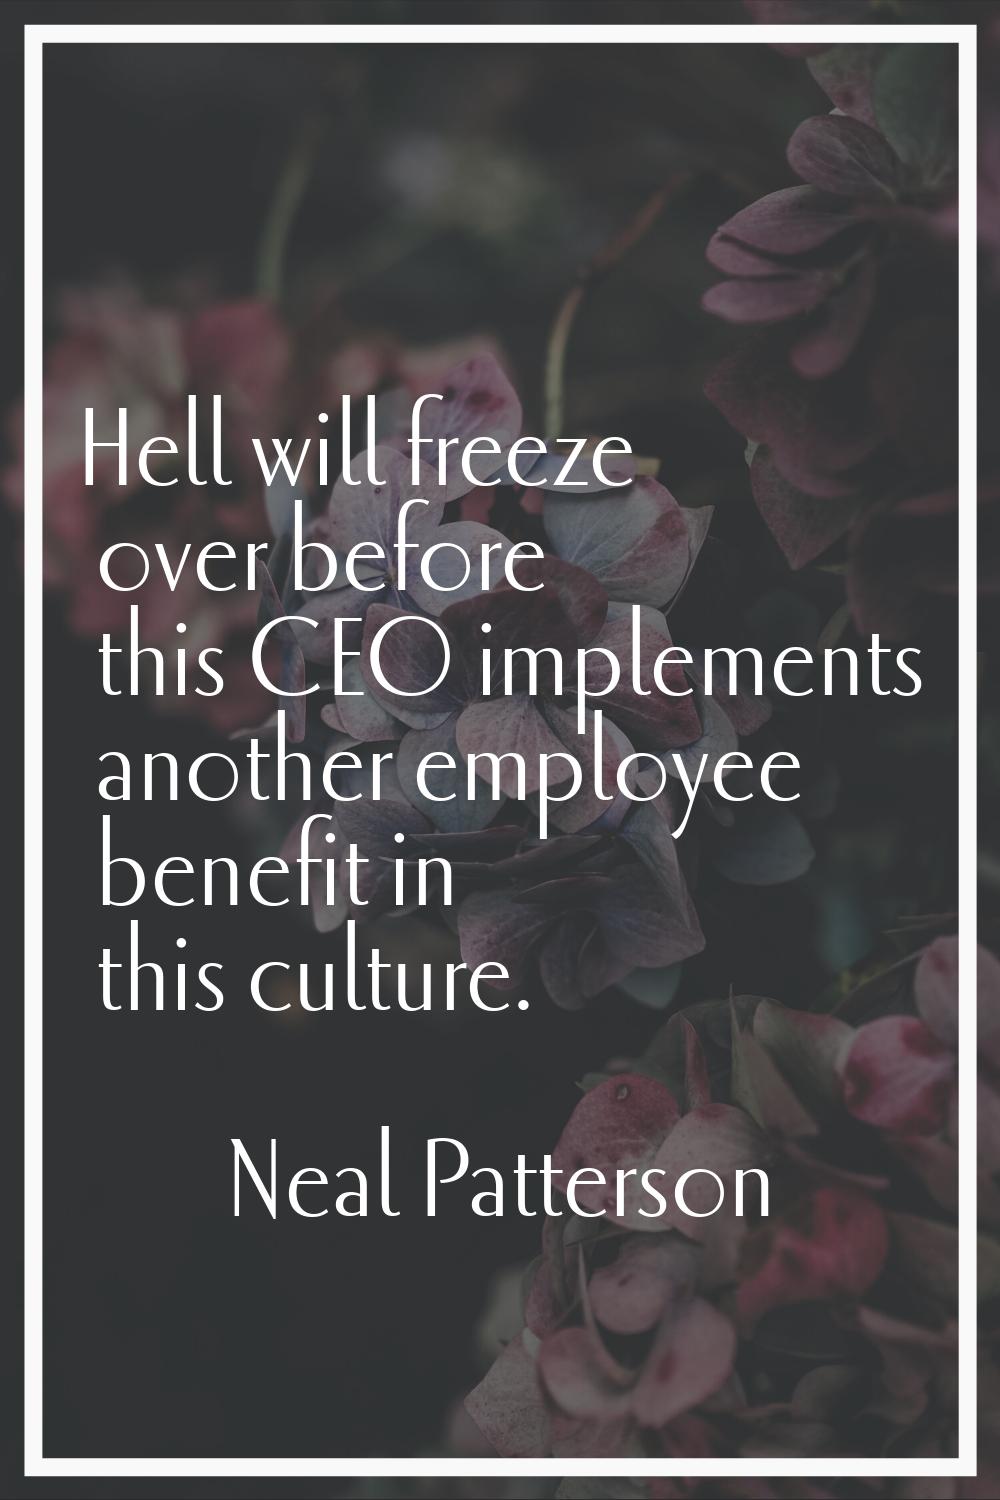 Hell will freeze over before this CEO implements another employee benefit in this culture.